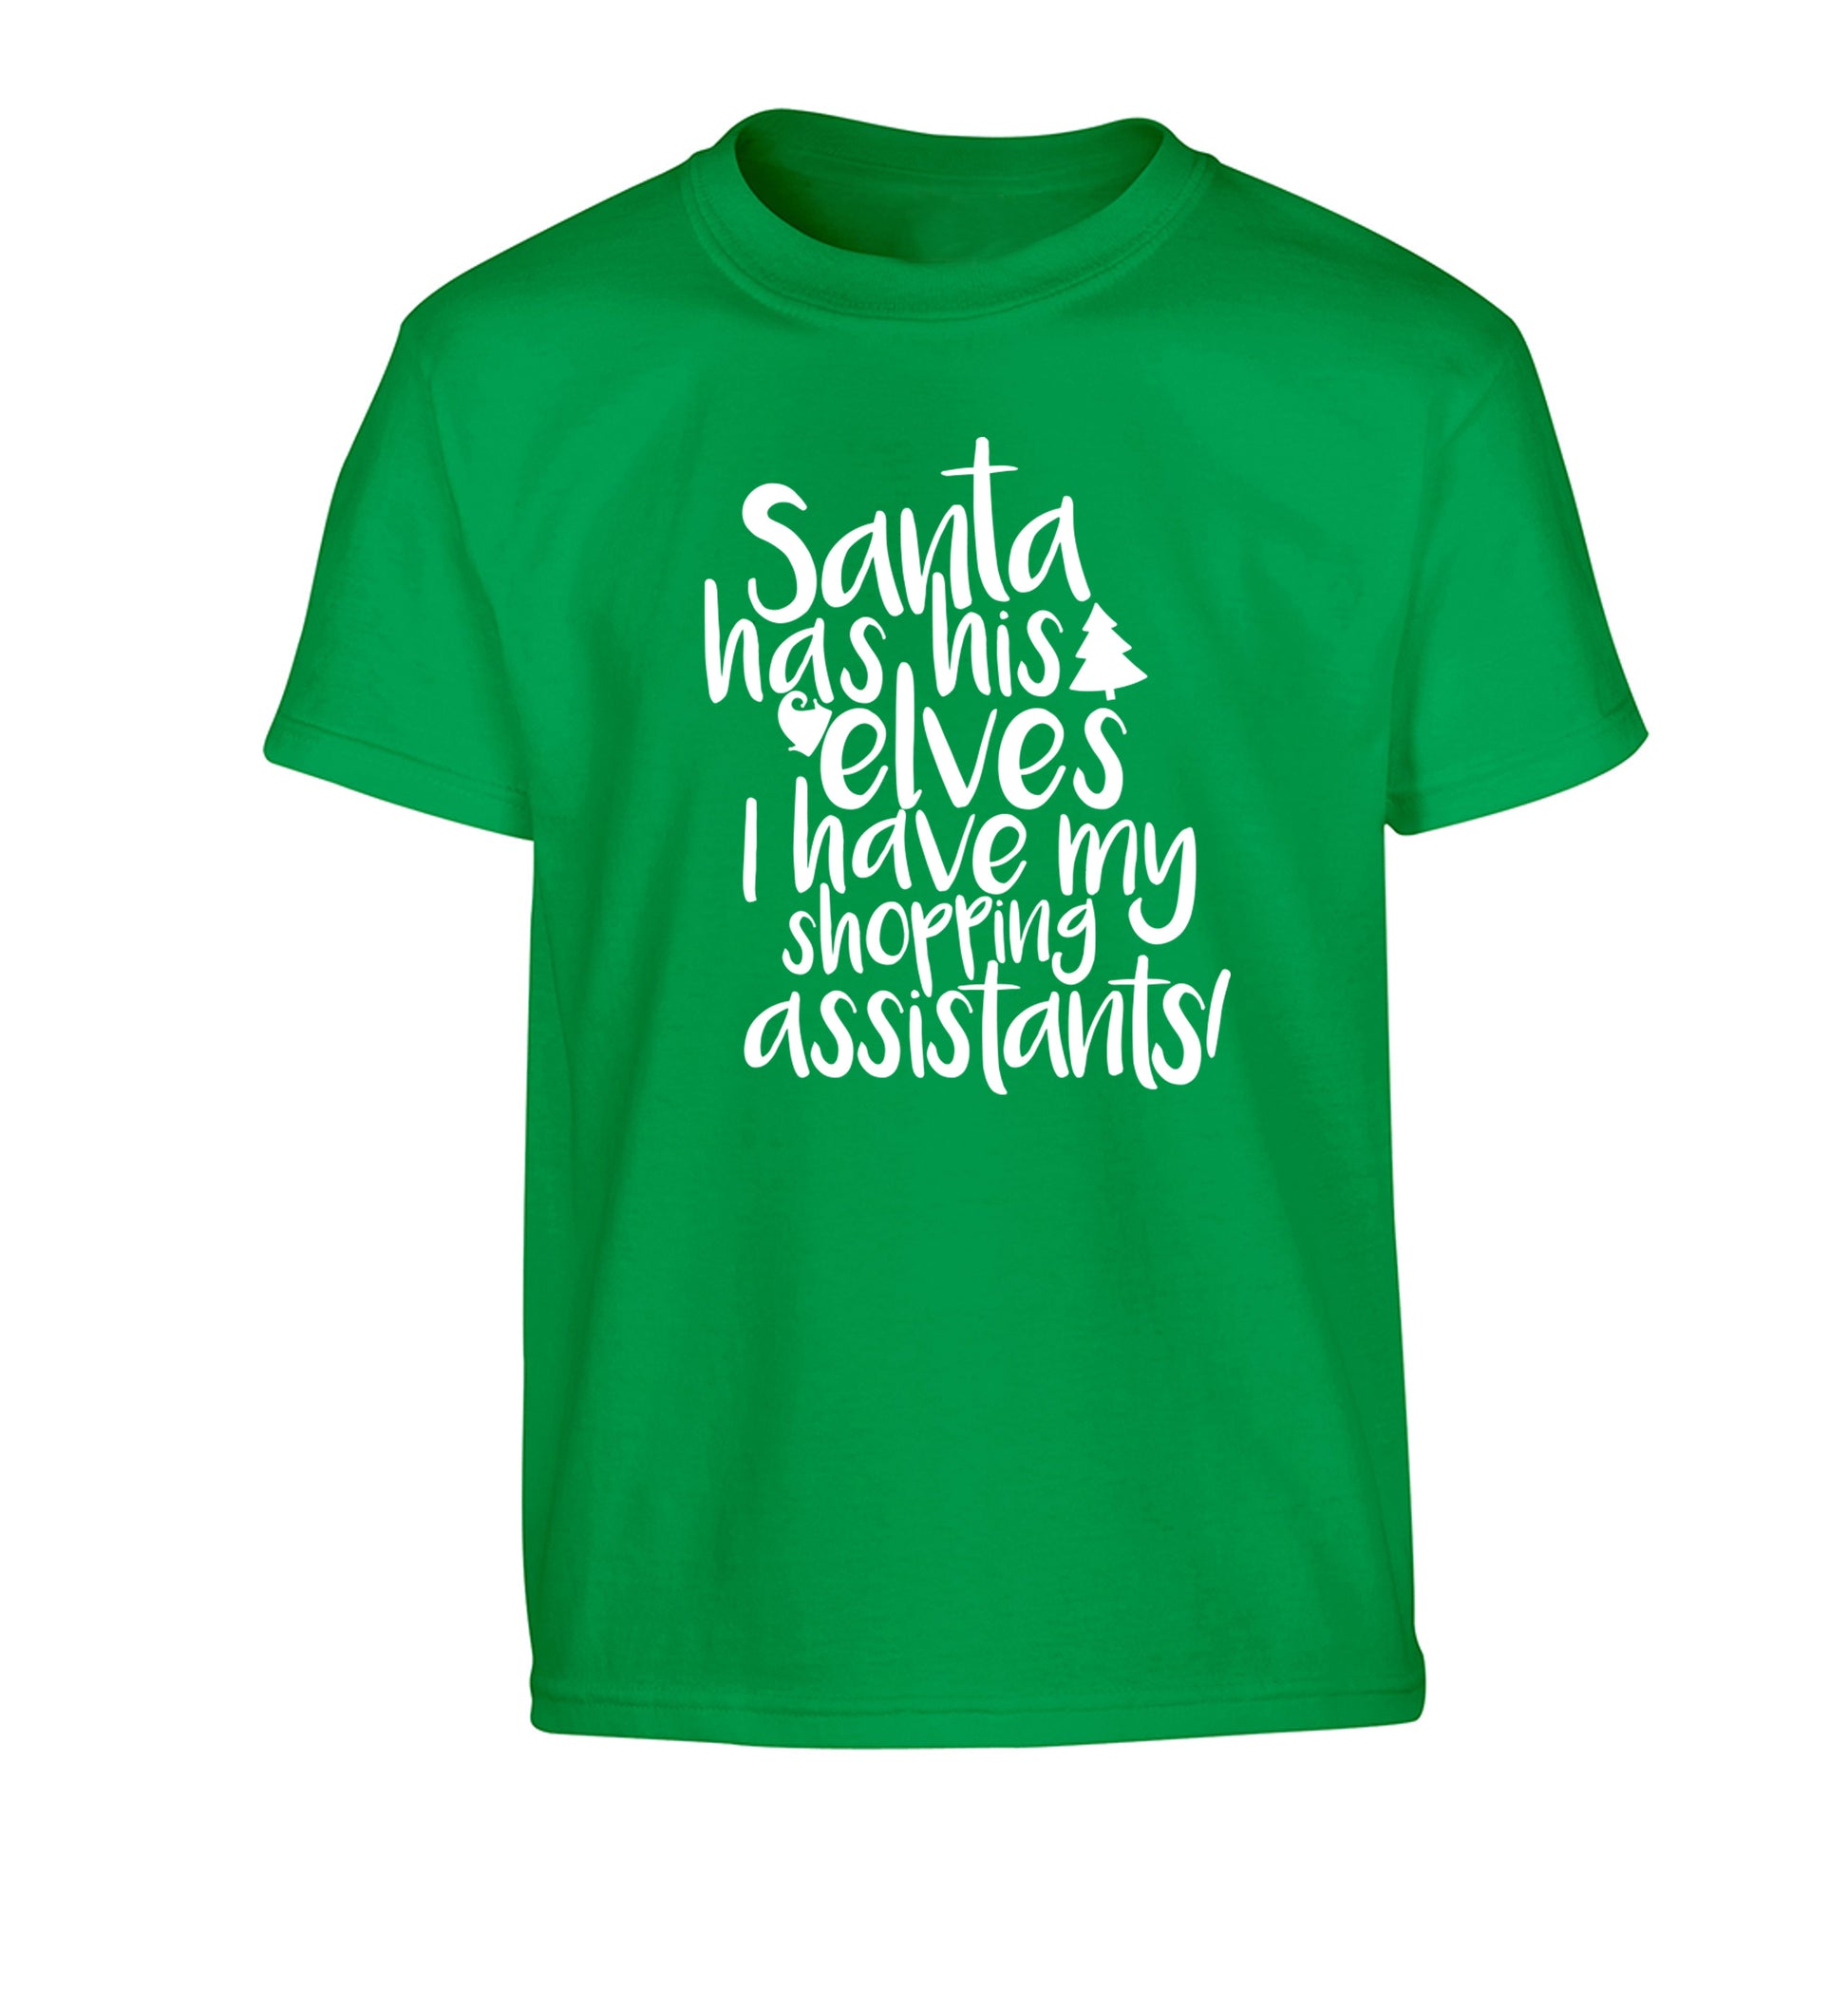 Santa has his elves I have my shopping assistant Children's green Tshirt 12-14 Years